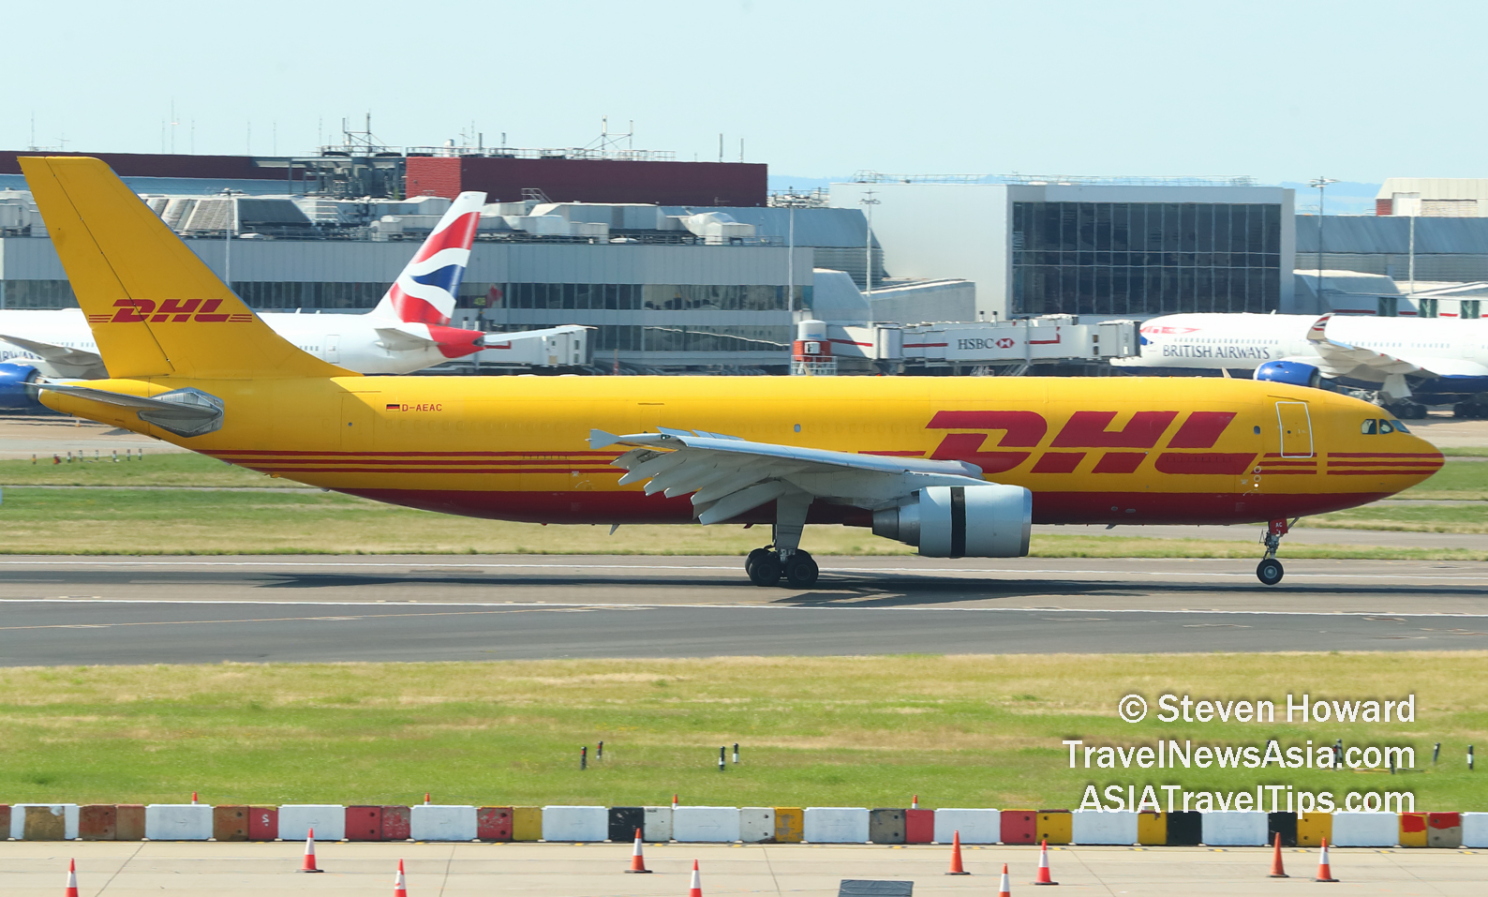 DHL Airbus A330F reg: D-AEAC. Picture by Steven Howard of TravelNewsAsia.com Click to enlarge.